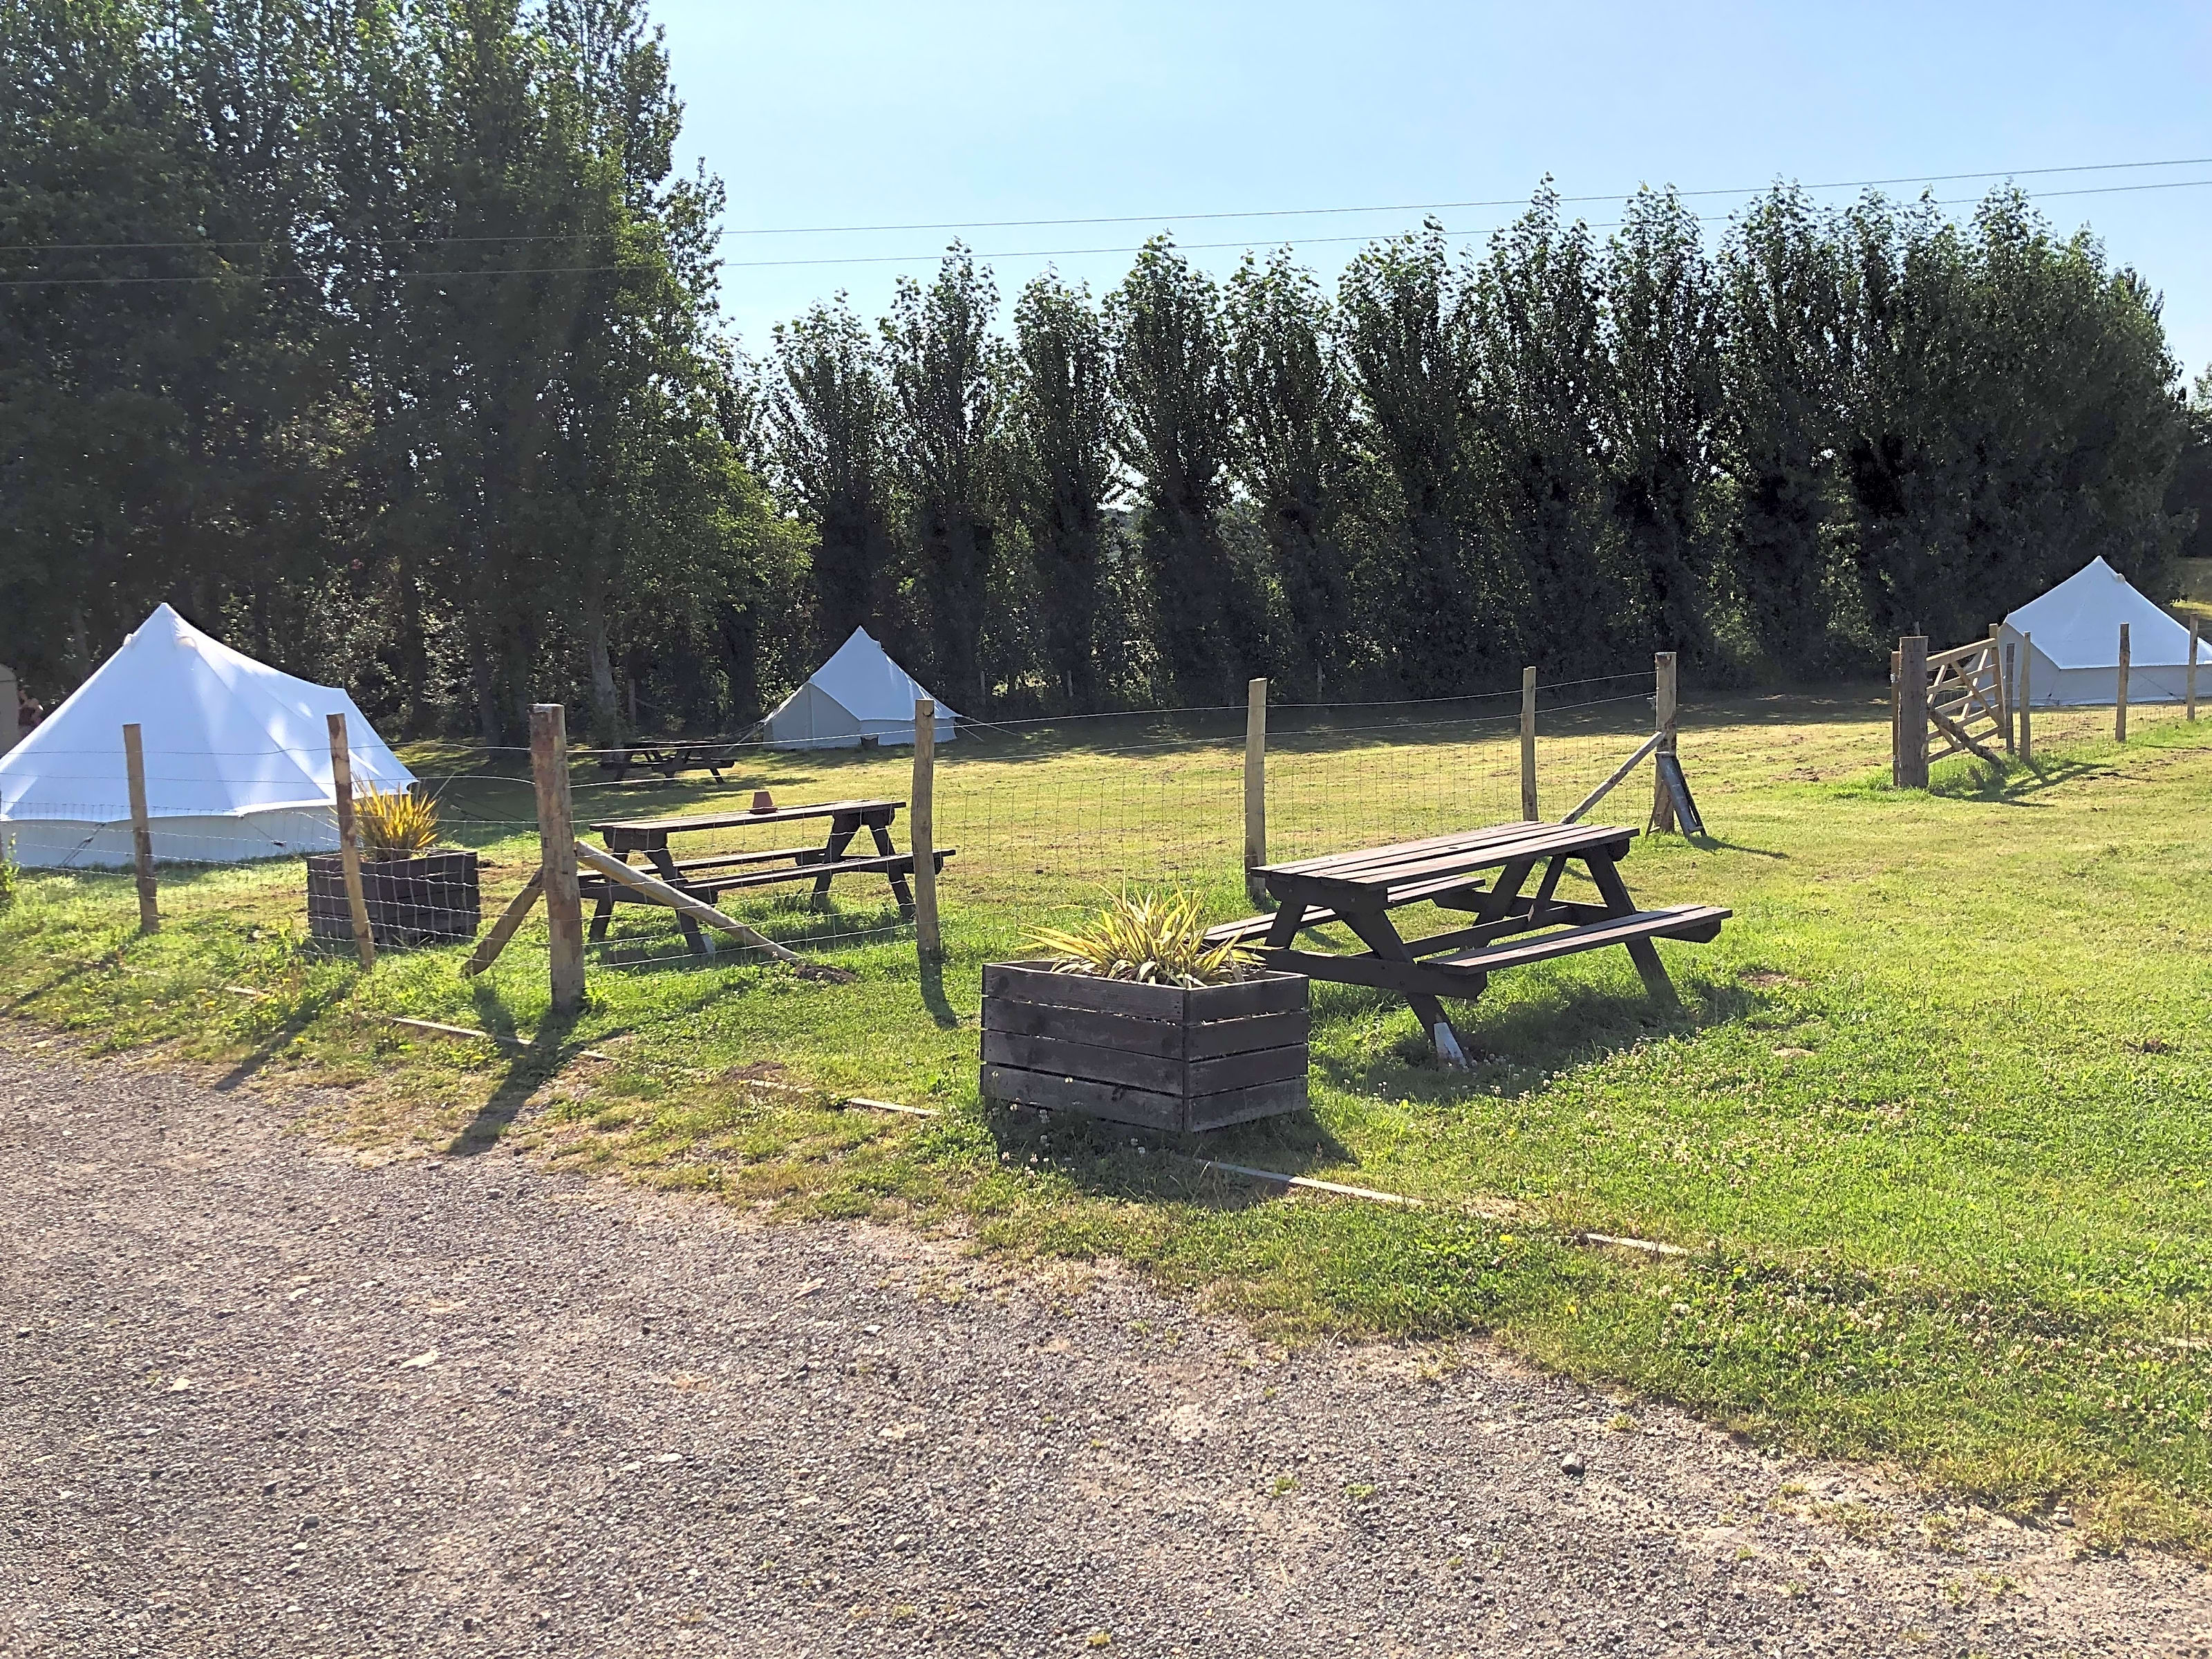 Buckhurst Campsite Sedlescombe Updated 2020 Prices Pitchup®